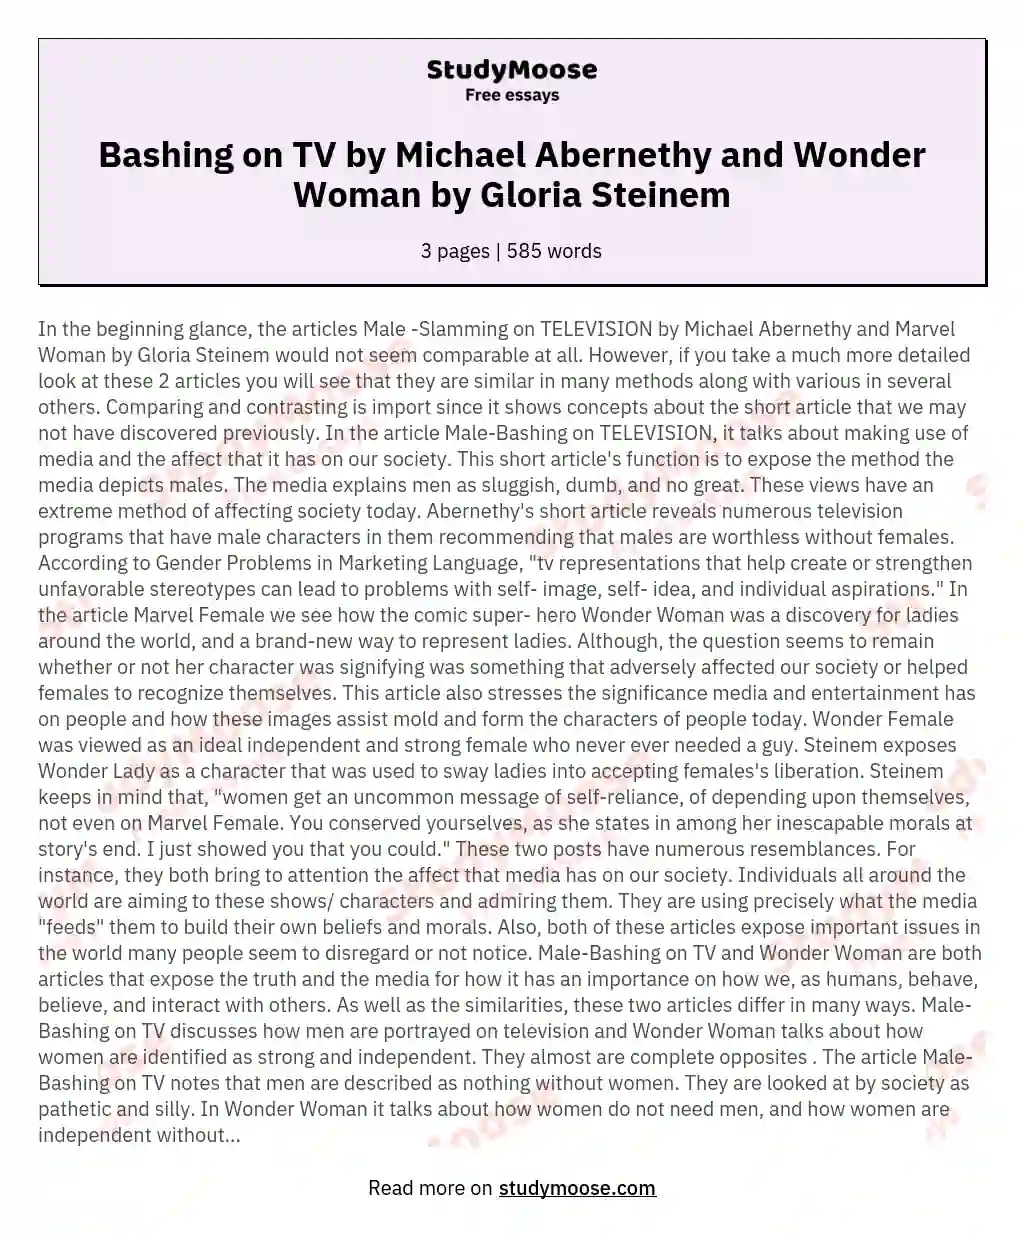 Bashing on TV by Michael Abernethy and Wonder Woman by Gloria Steinem